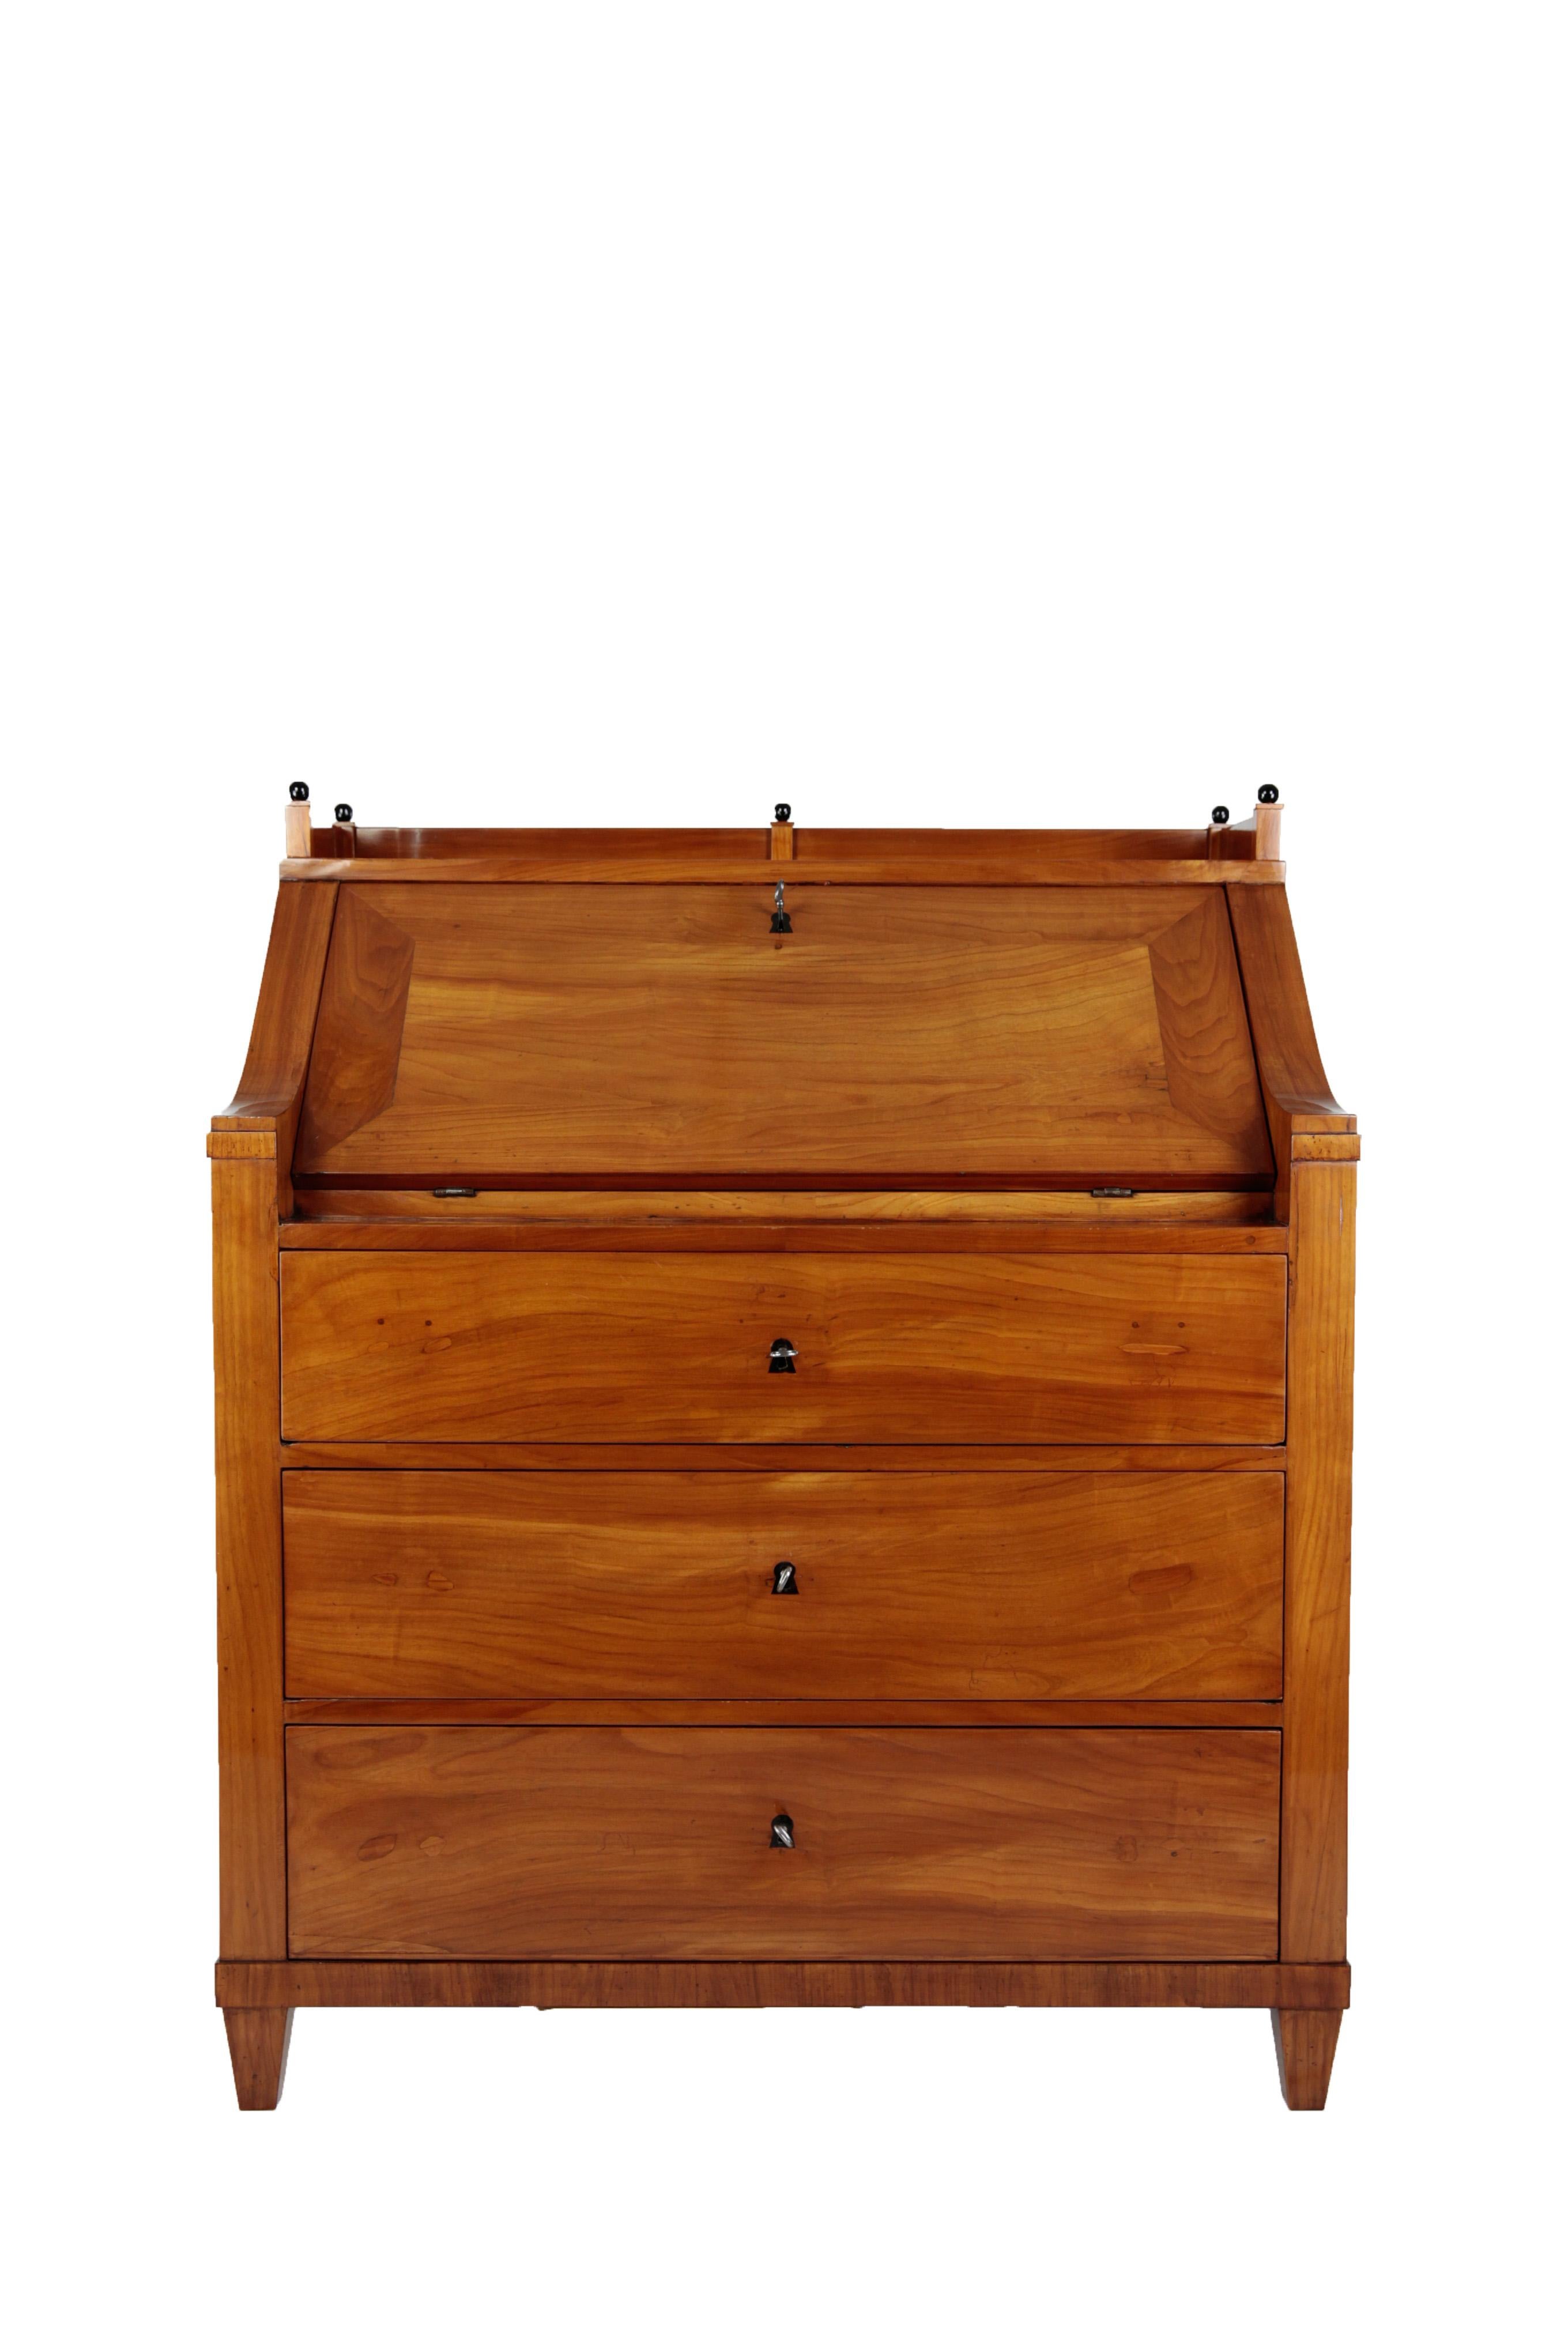 Secretary, circa 1830
cherrywood
3 spacious drawers, ebonized writing surface, small drawers with rootwood veneer on the inside
Restored residential-ready state
French shellac hand polish
Measures: Height 120 cm, width 100 cm, depth 61 cm,